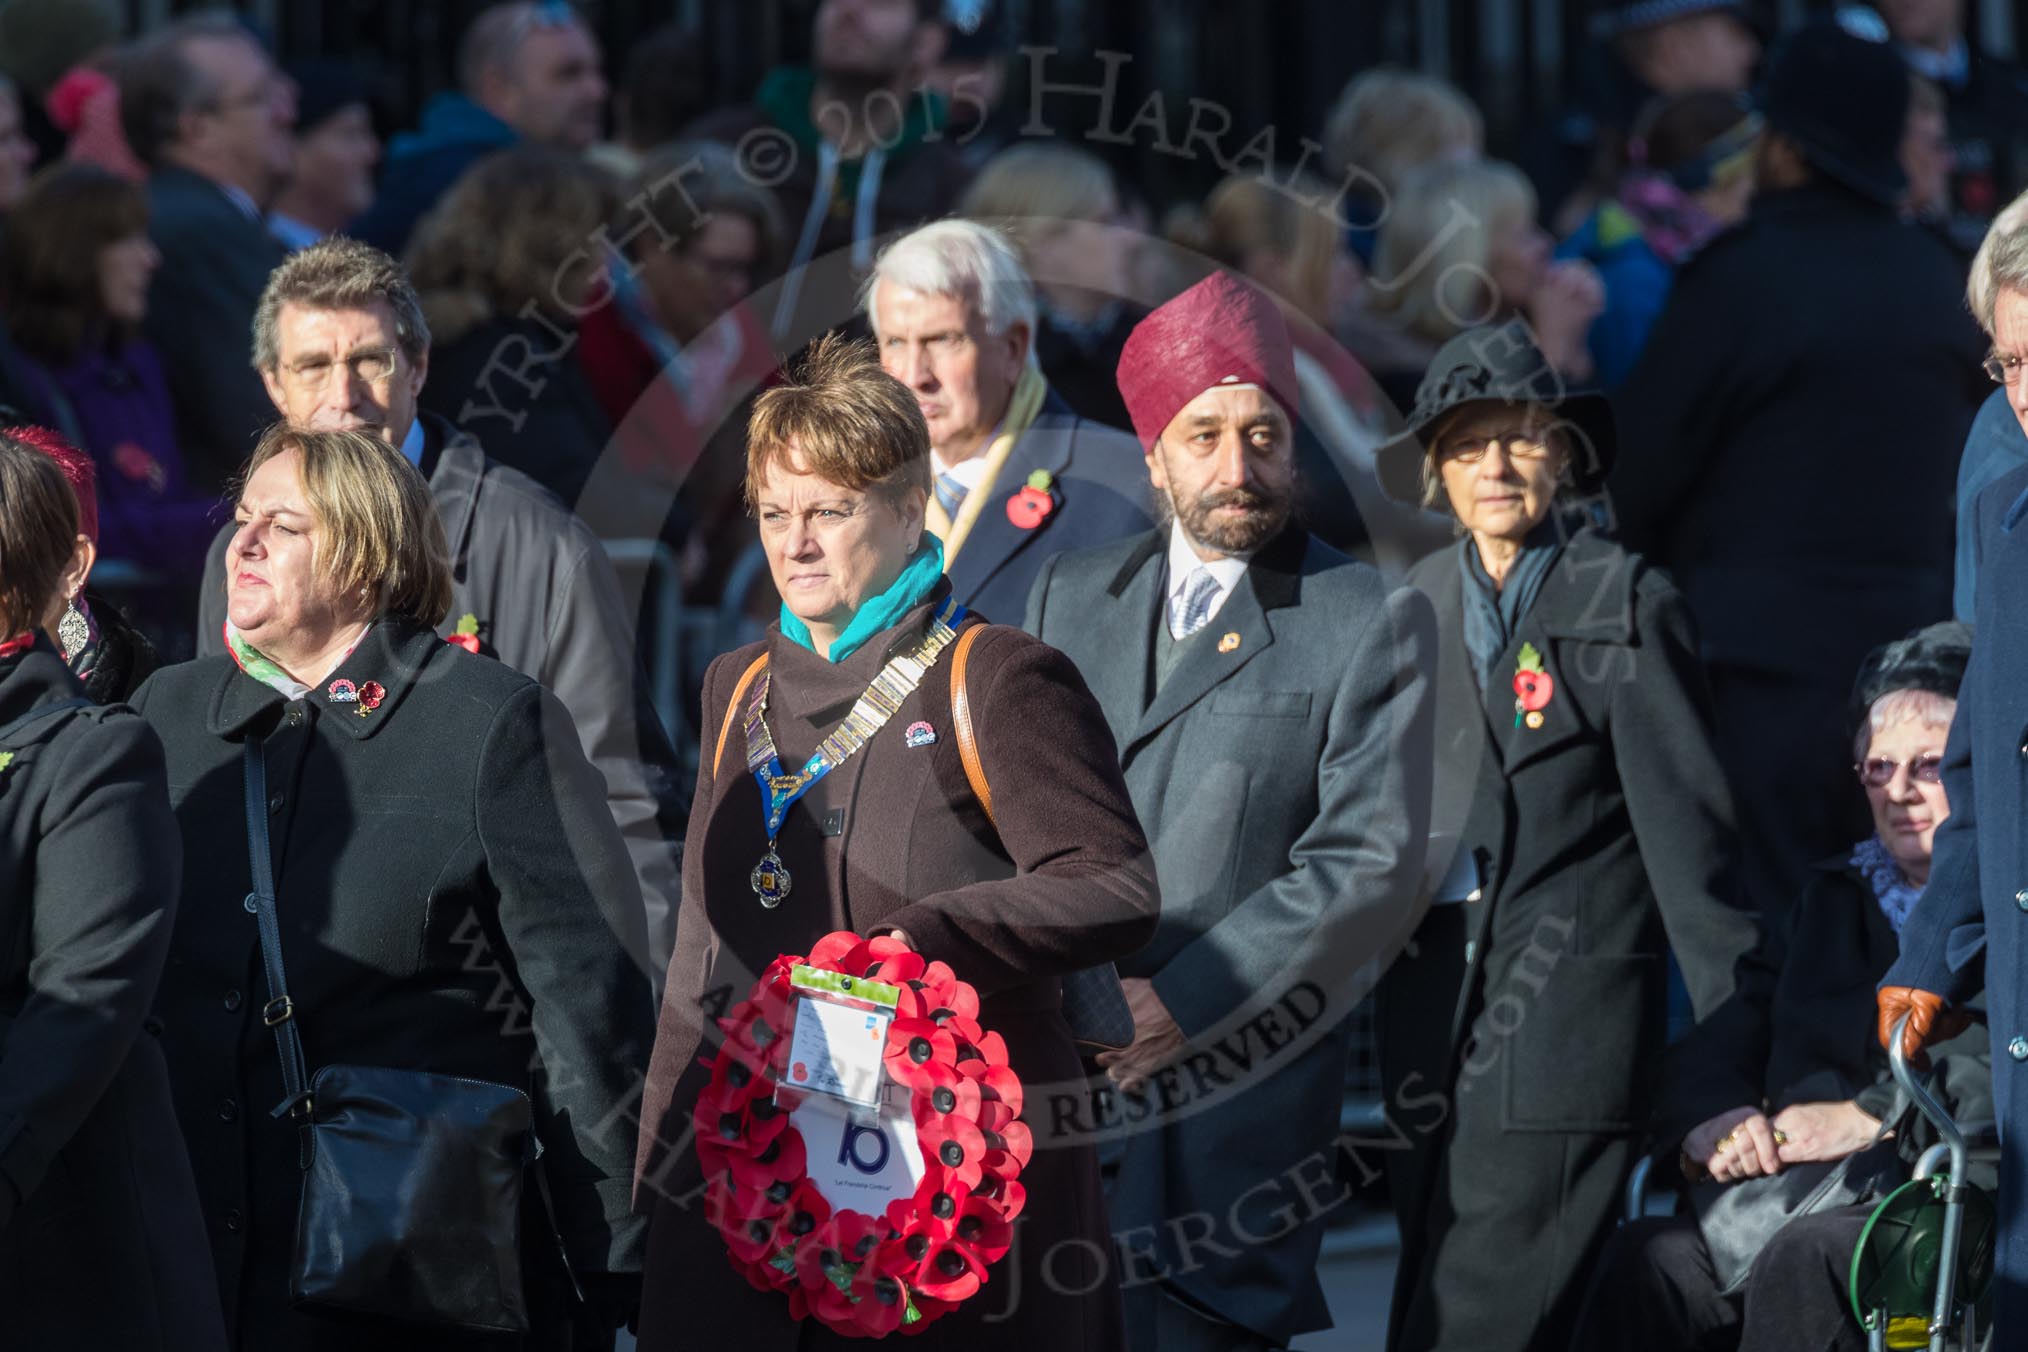 March Past, Remembrance Sunday at the Cenotaph 2016: M28 Lions Club International.
Cenotaph, Whitehall, London SW1,
London,
Greater London,
United Kingdom,
on 13 November 2016 at 13:17, image #2730